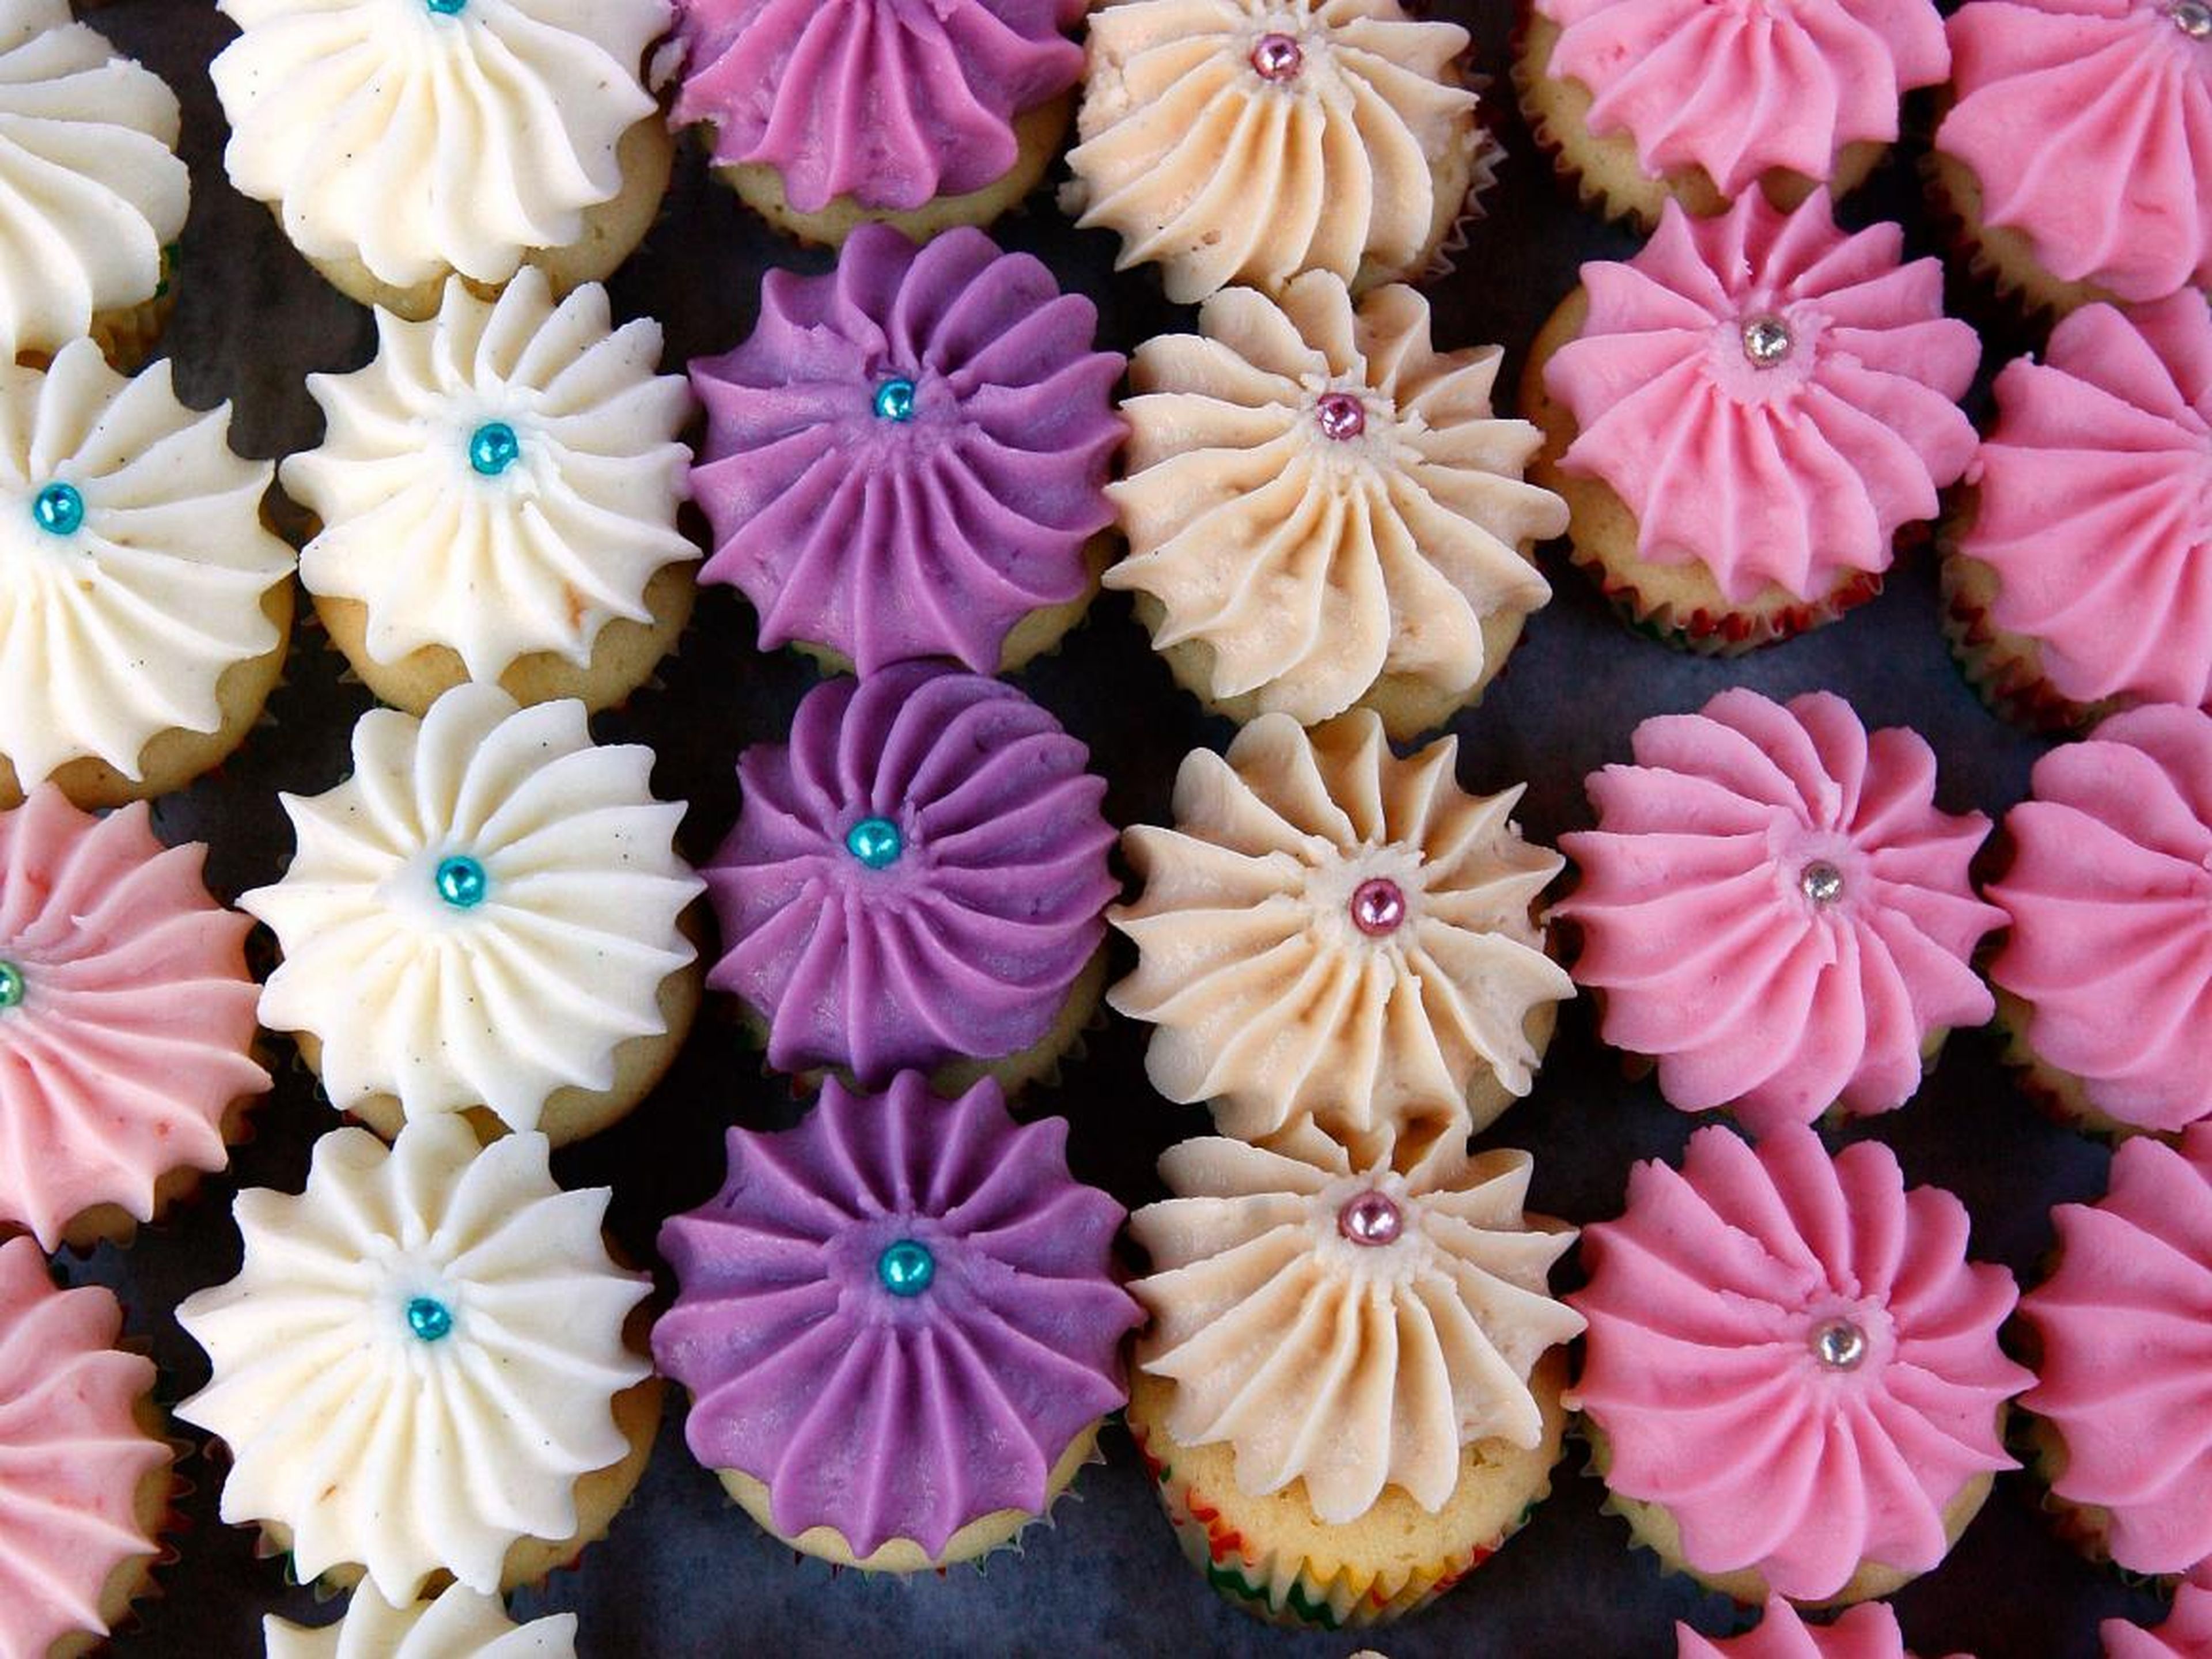 According to Guinness World Records, all food-related record attempts are required to not waste any food, so all 18,818 cupcakes (not pictured) were donated to non-governmental organizations.